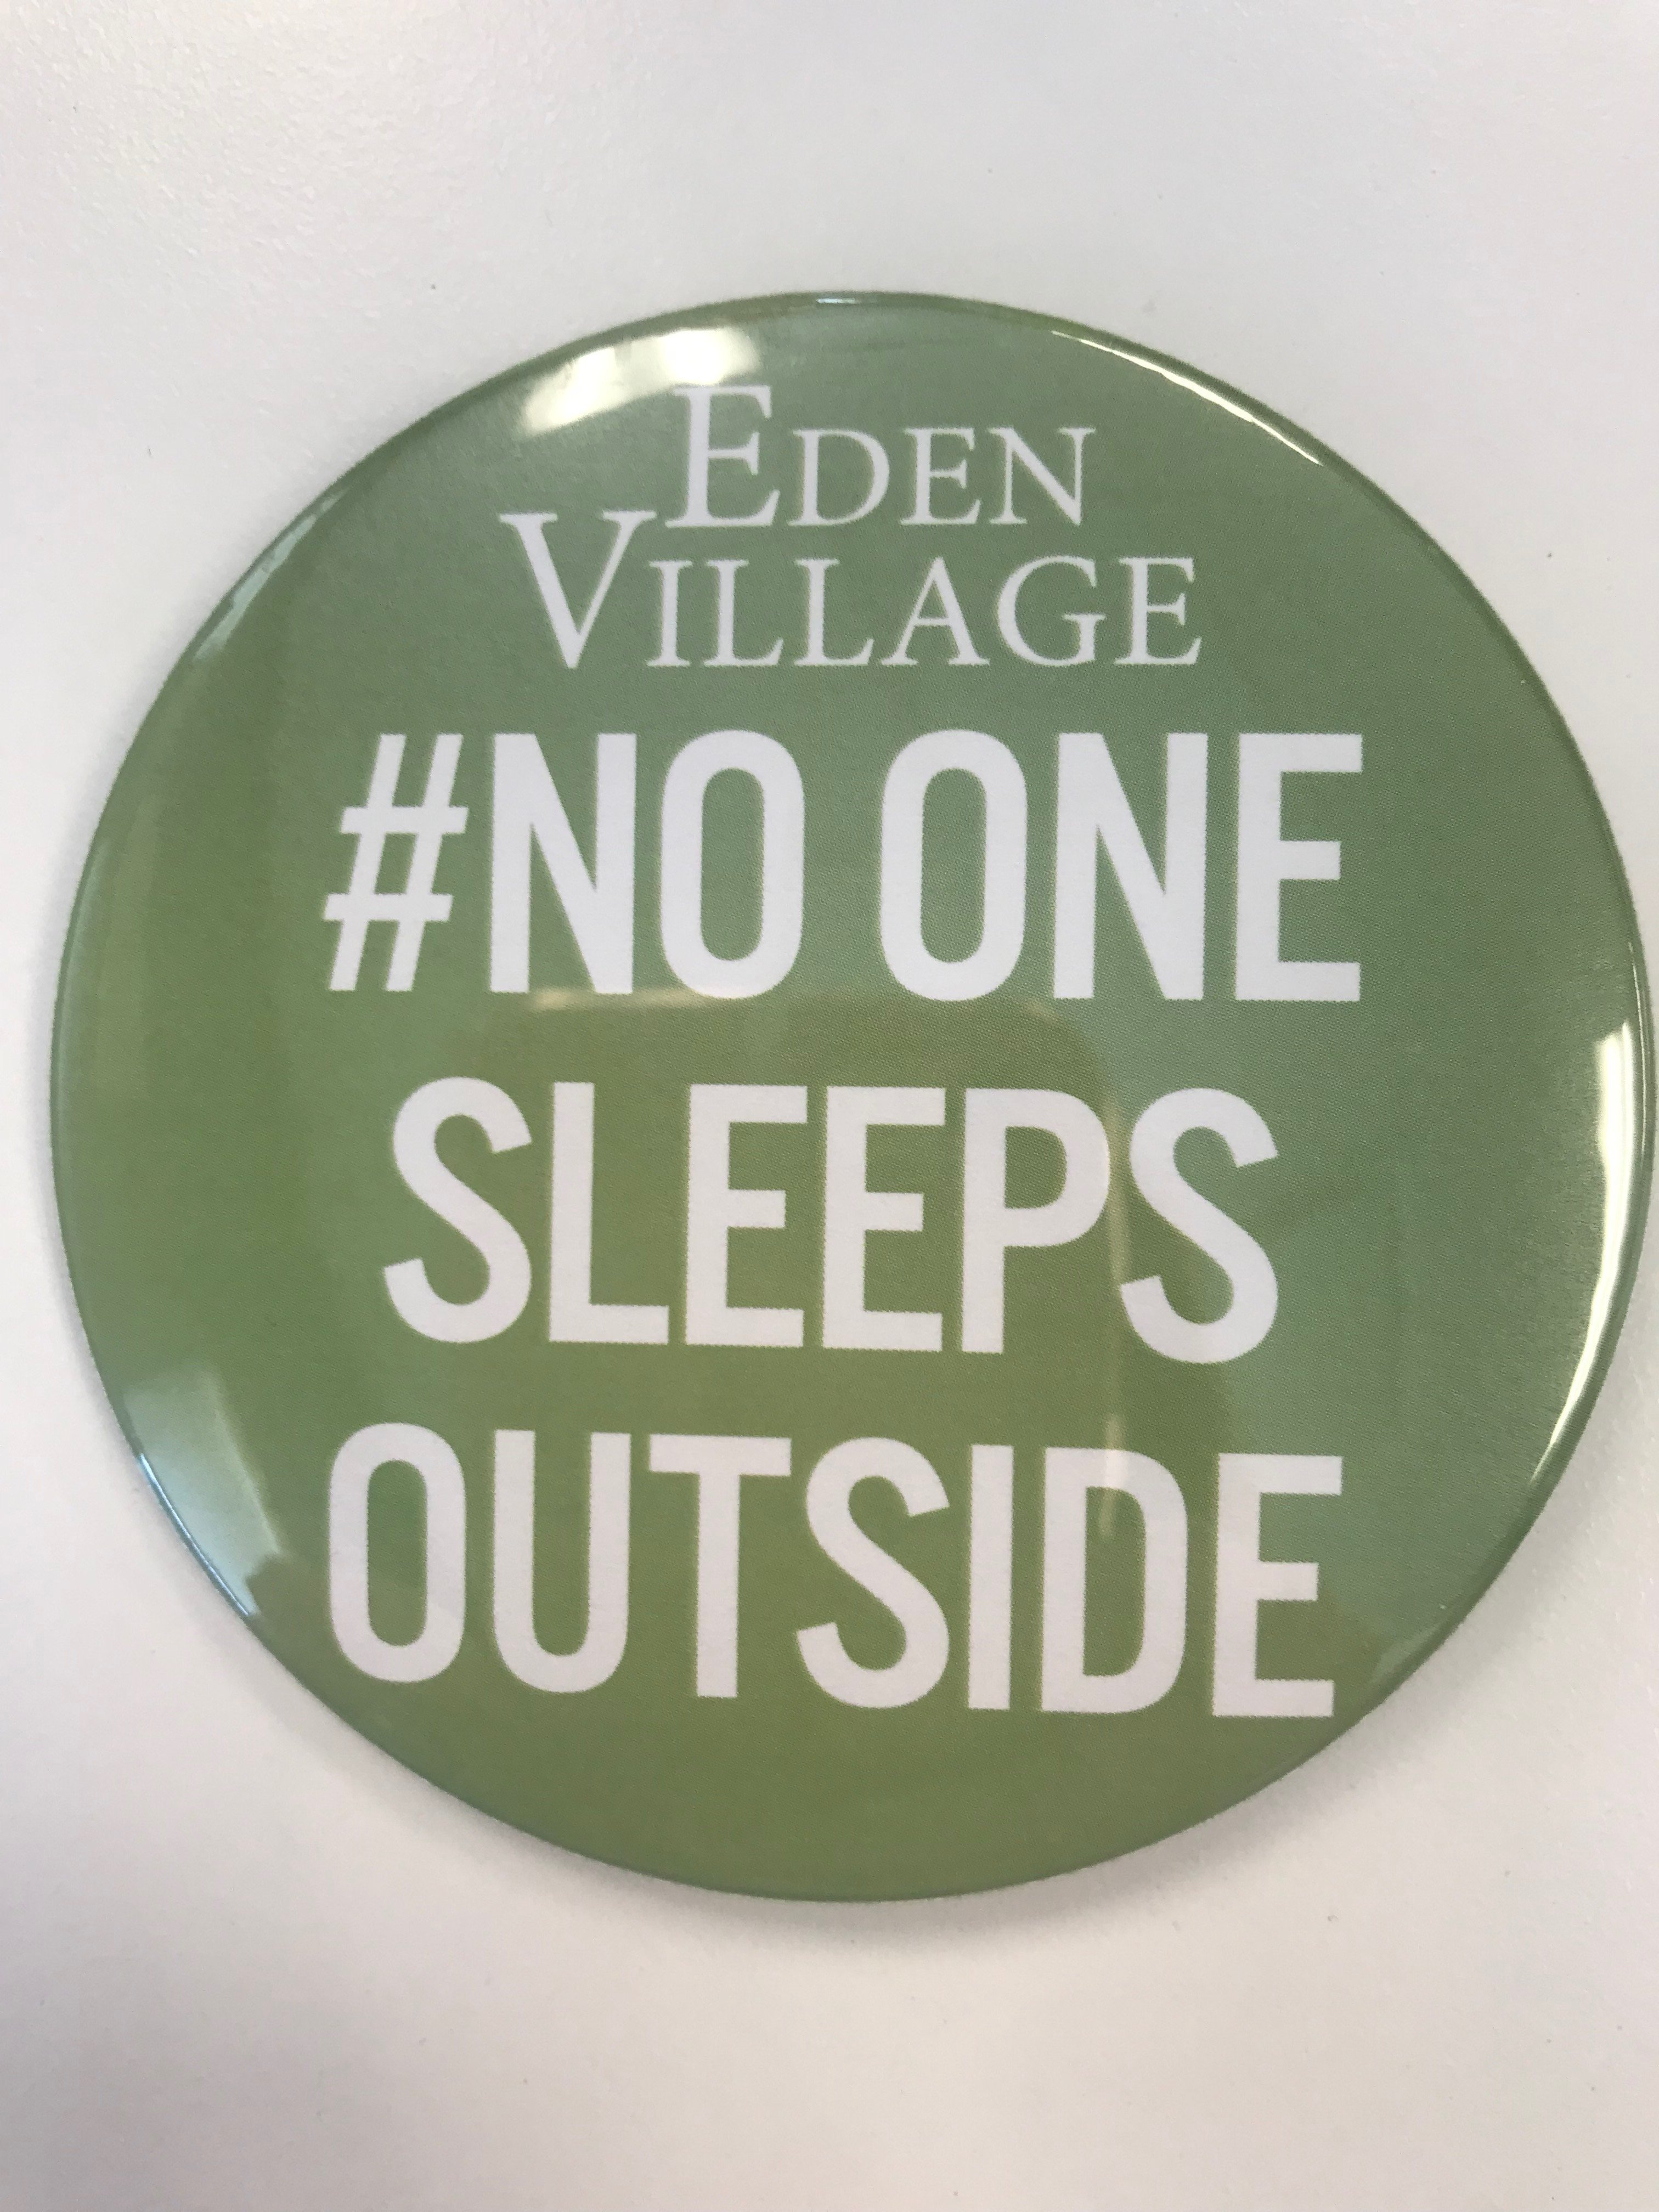 Eden Village is a tiny home community for the disabled/chronically homeless. We believe that Springfield Mo will one day be a city where #NoOneSleepsOutside!